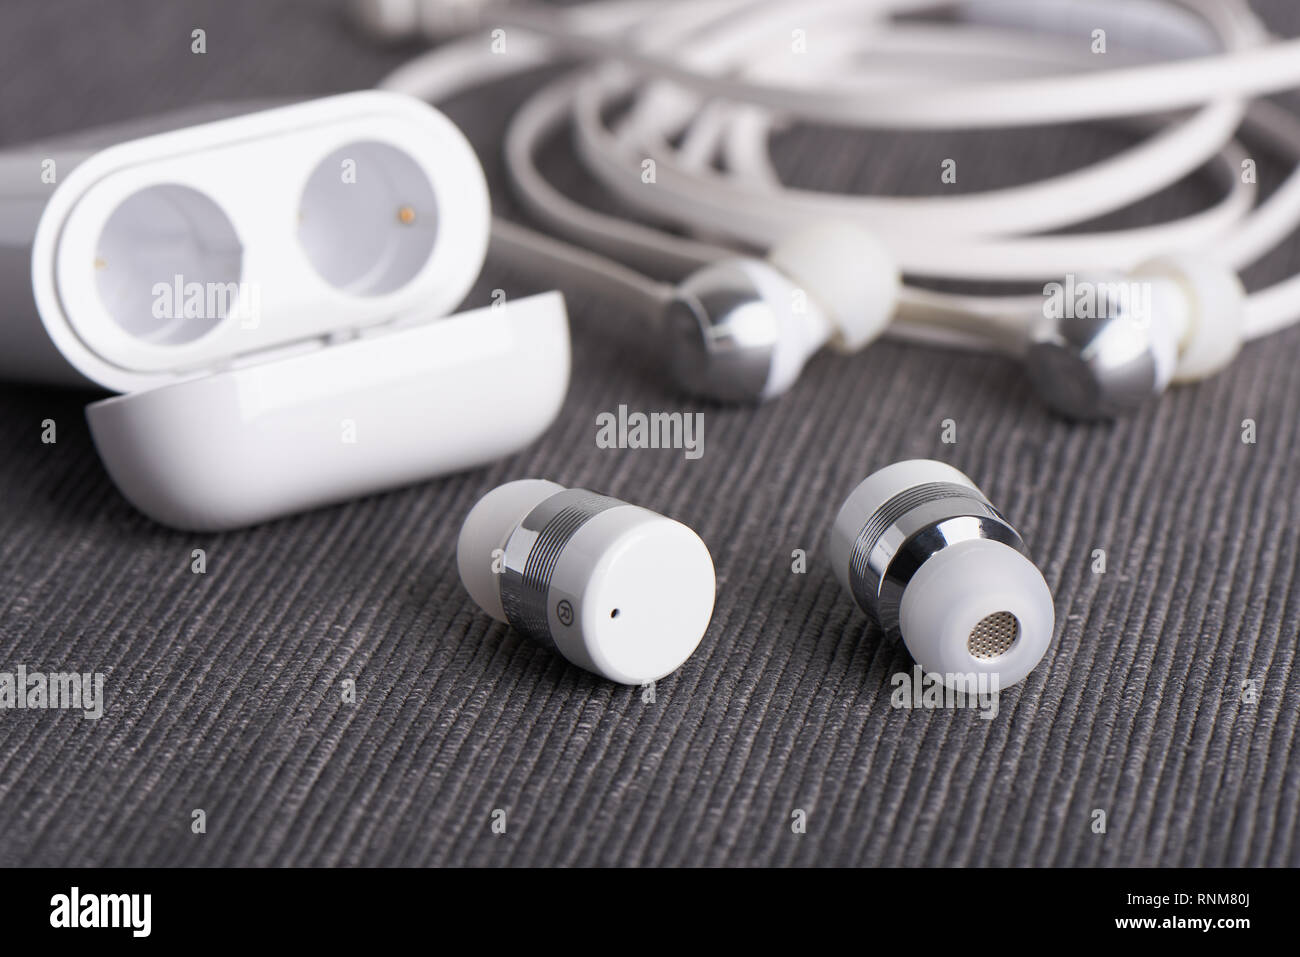 wireless cordless bluetooth earbuds with chargeable case on a background of cable earphone Stock Photo